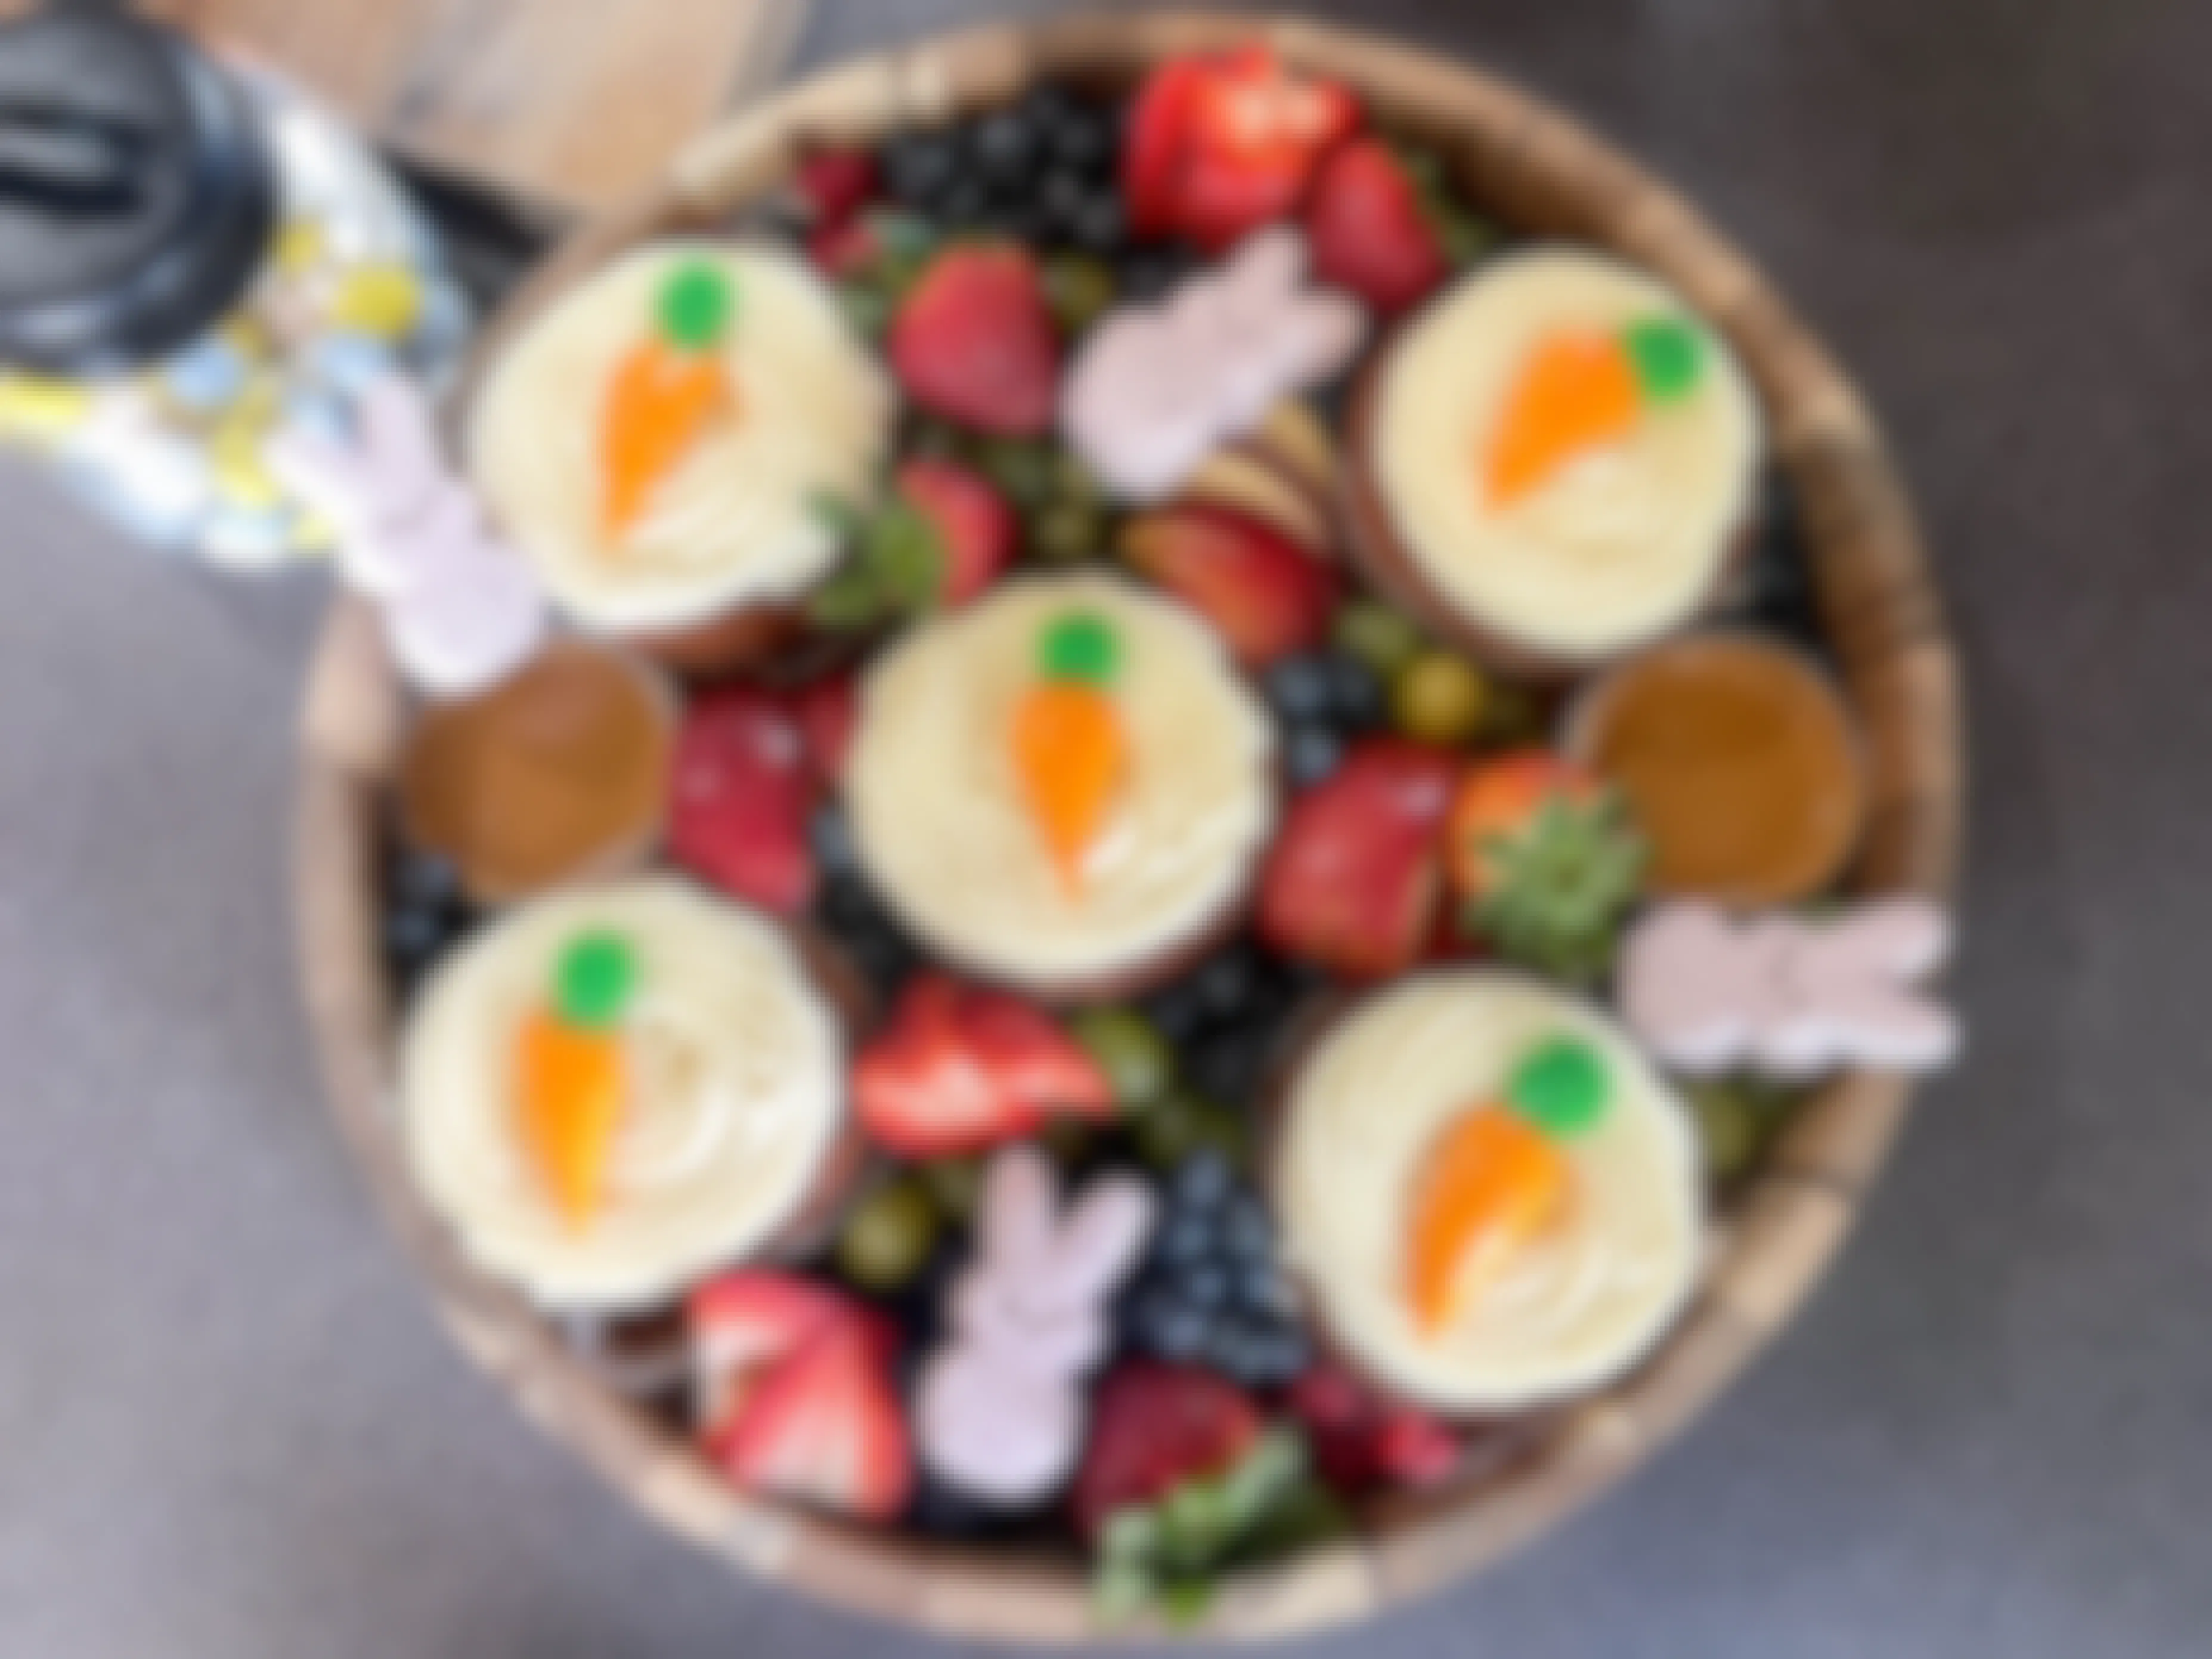 carrot cake cupcakes put into a fruit and easter board 